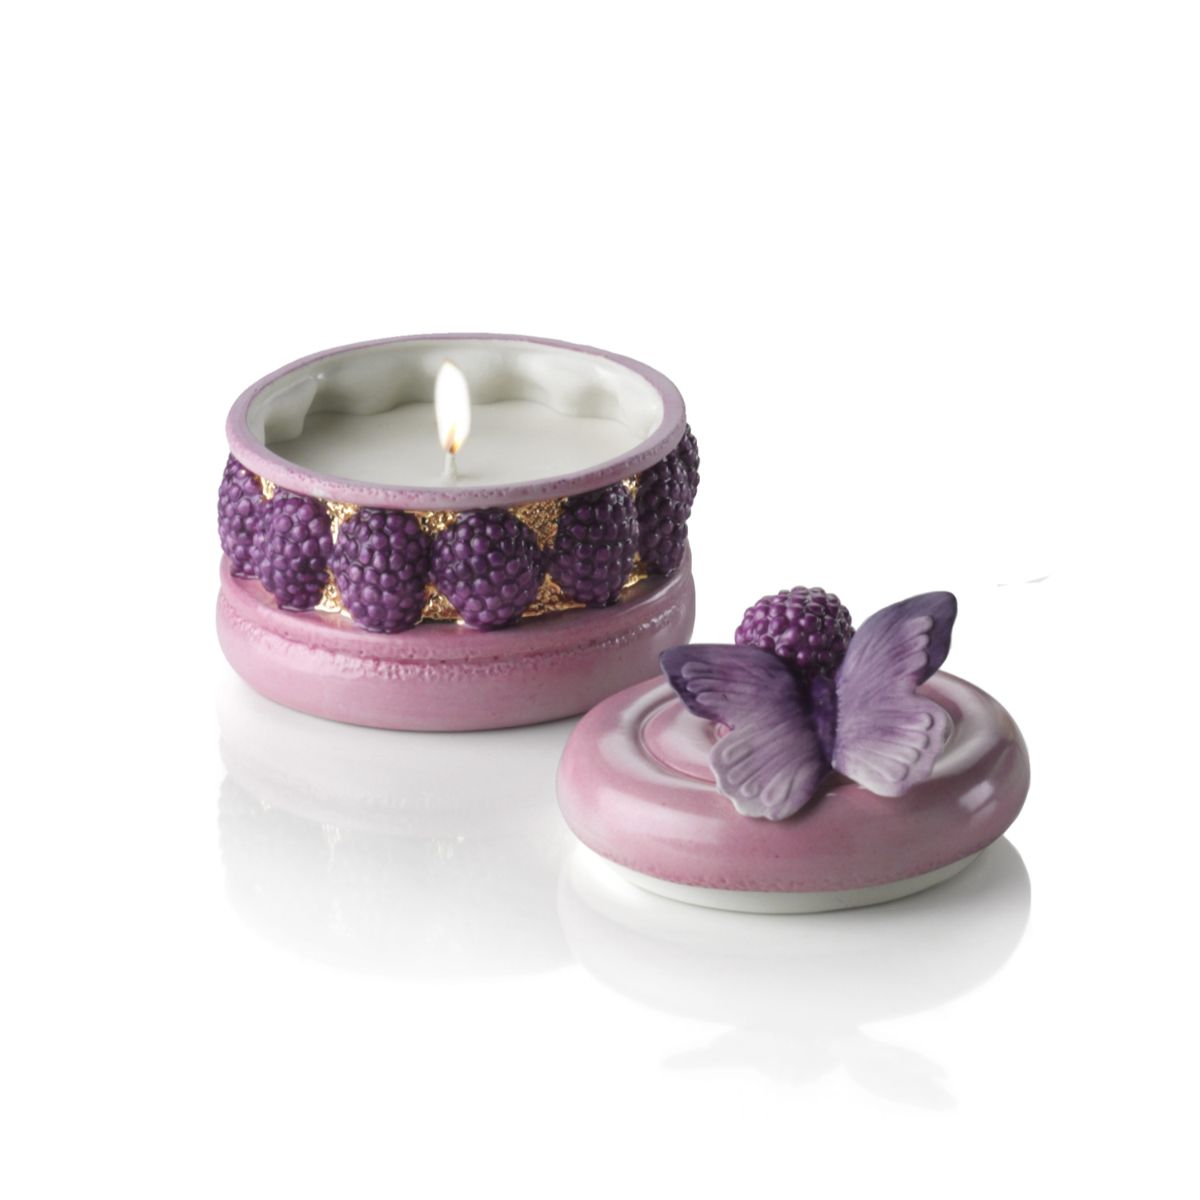 Chantilly Ispahan Pia Cake Scented Candle - Lilac